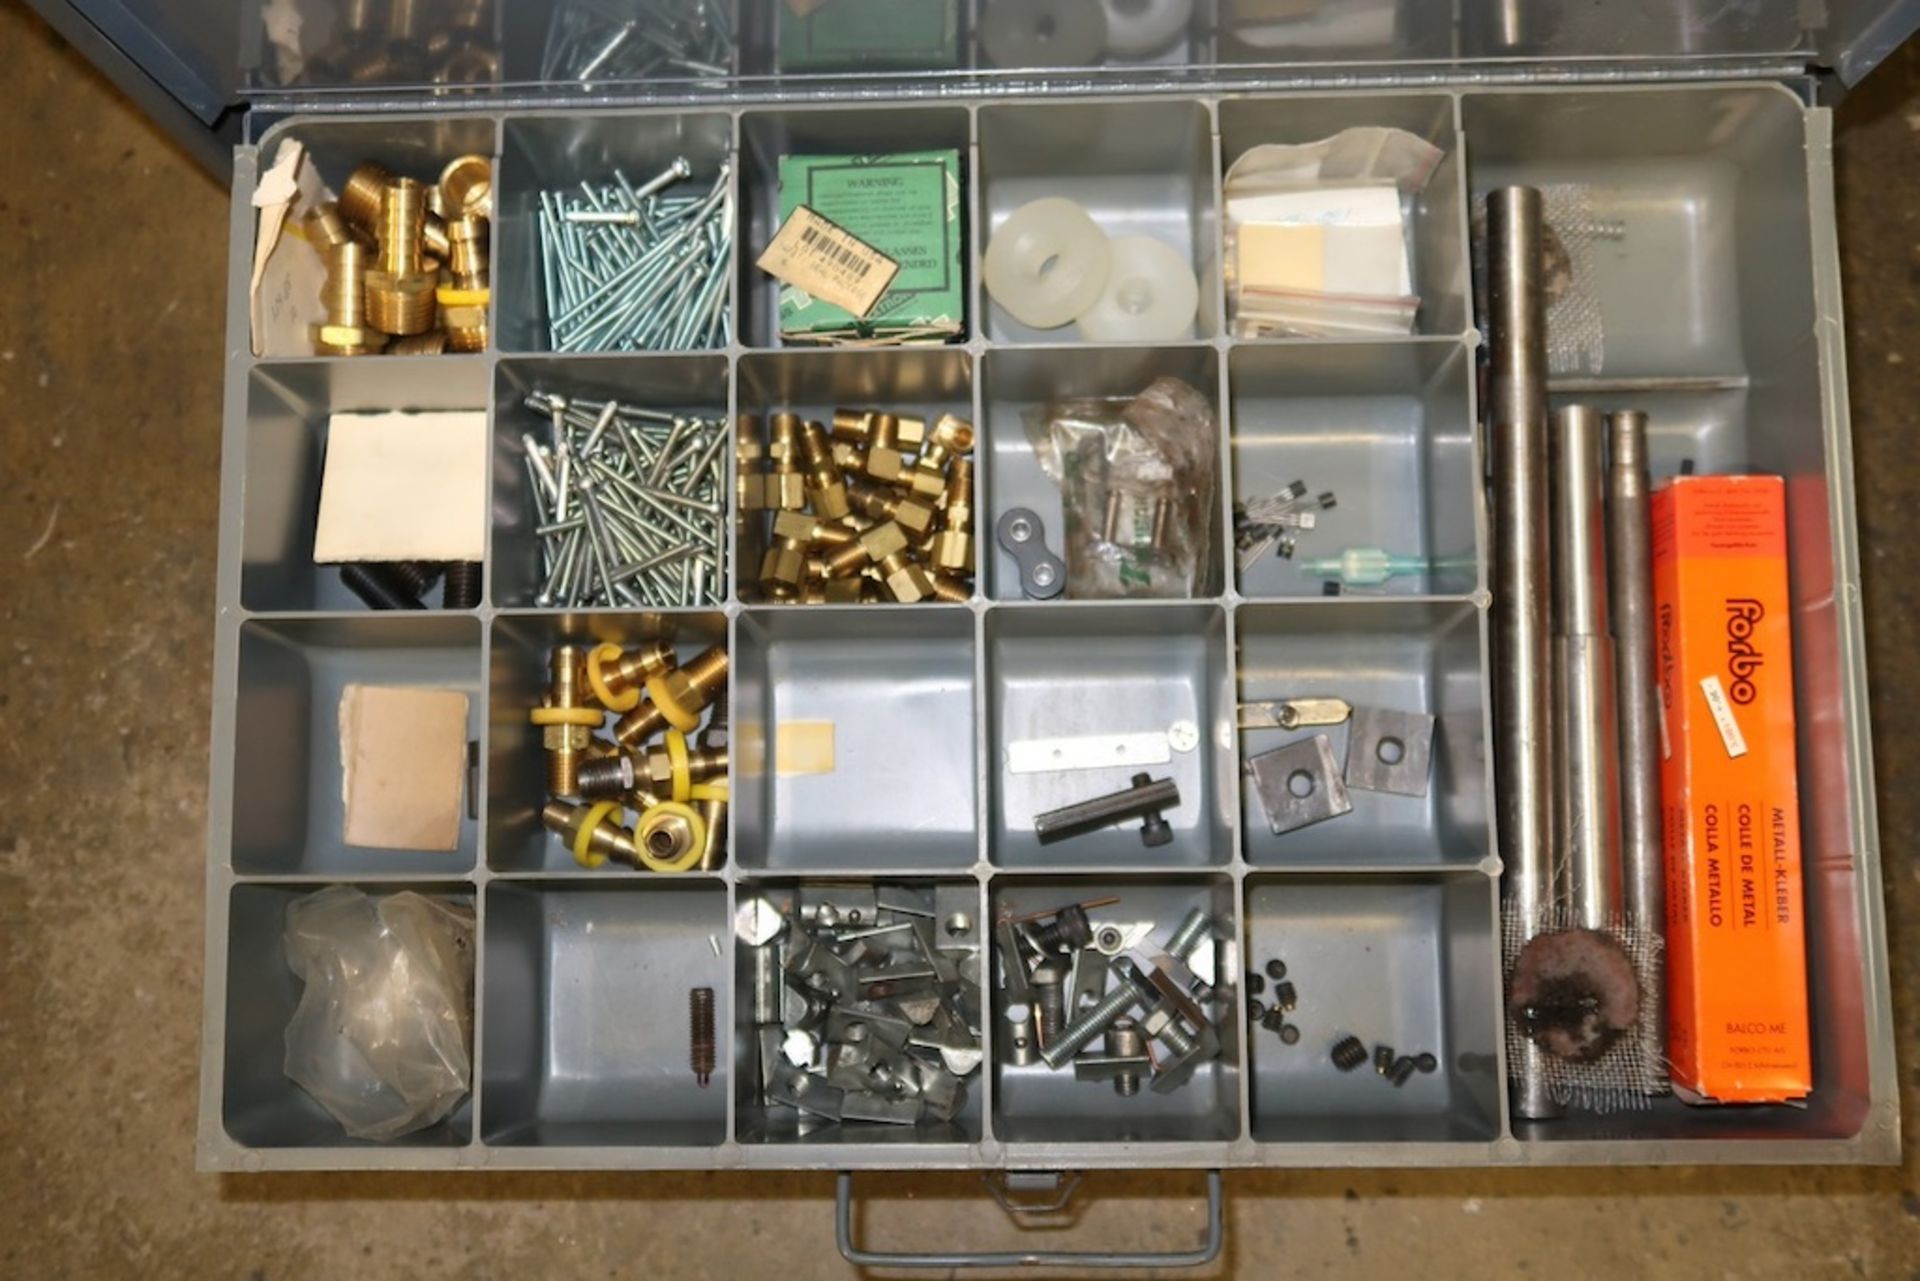 Remaining Contents of Tool Room Cage, Including Hardware Organizers, Etc. - Image 8 of 20